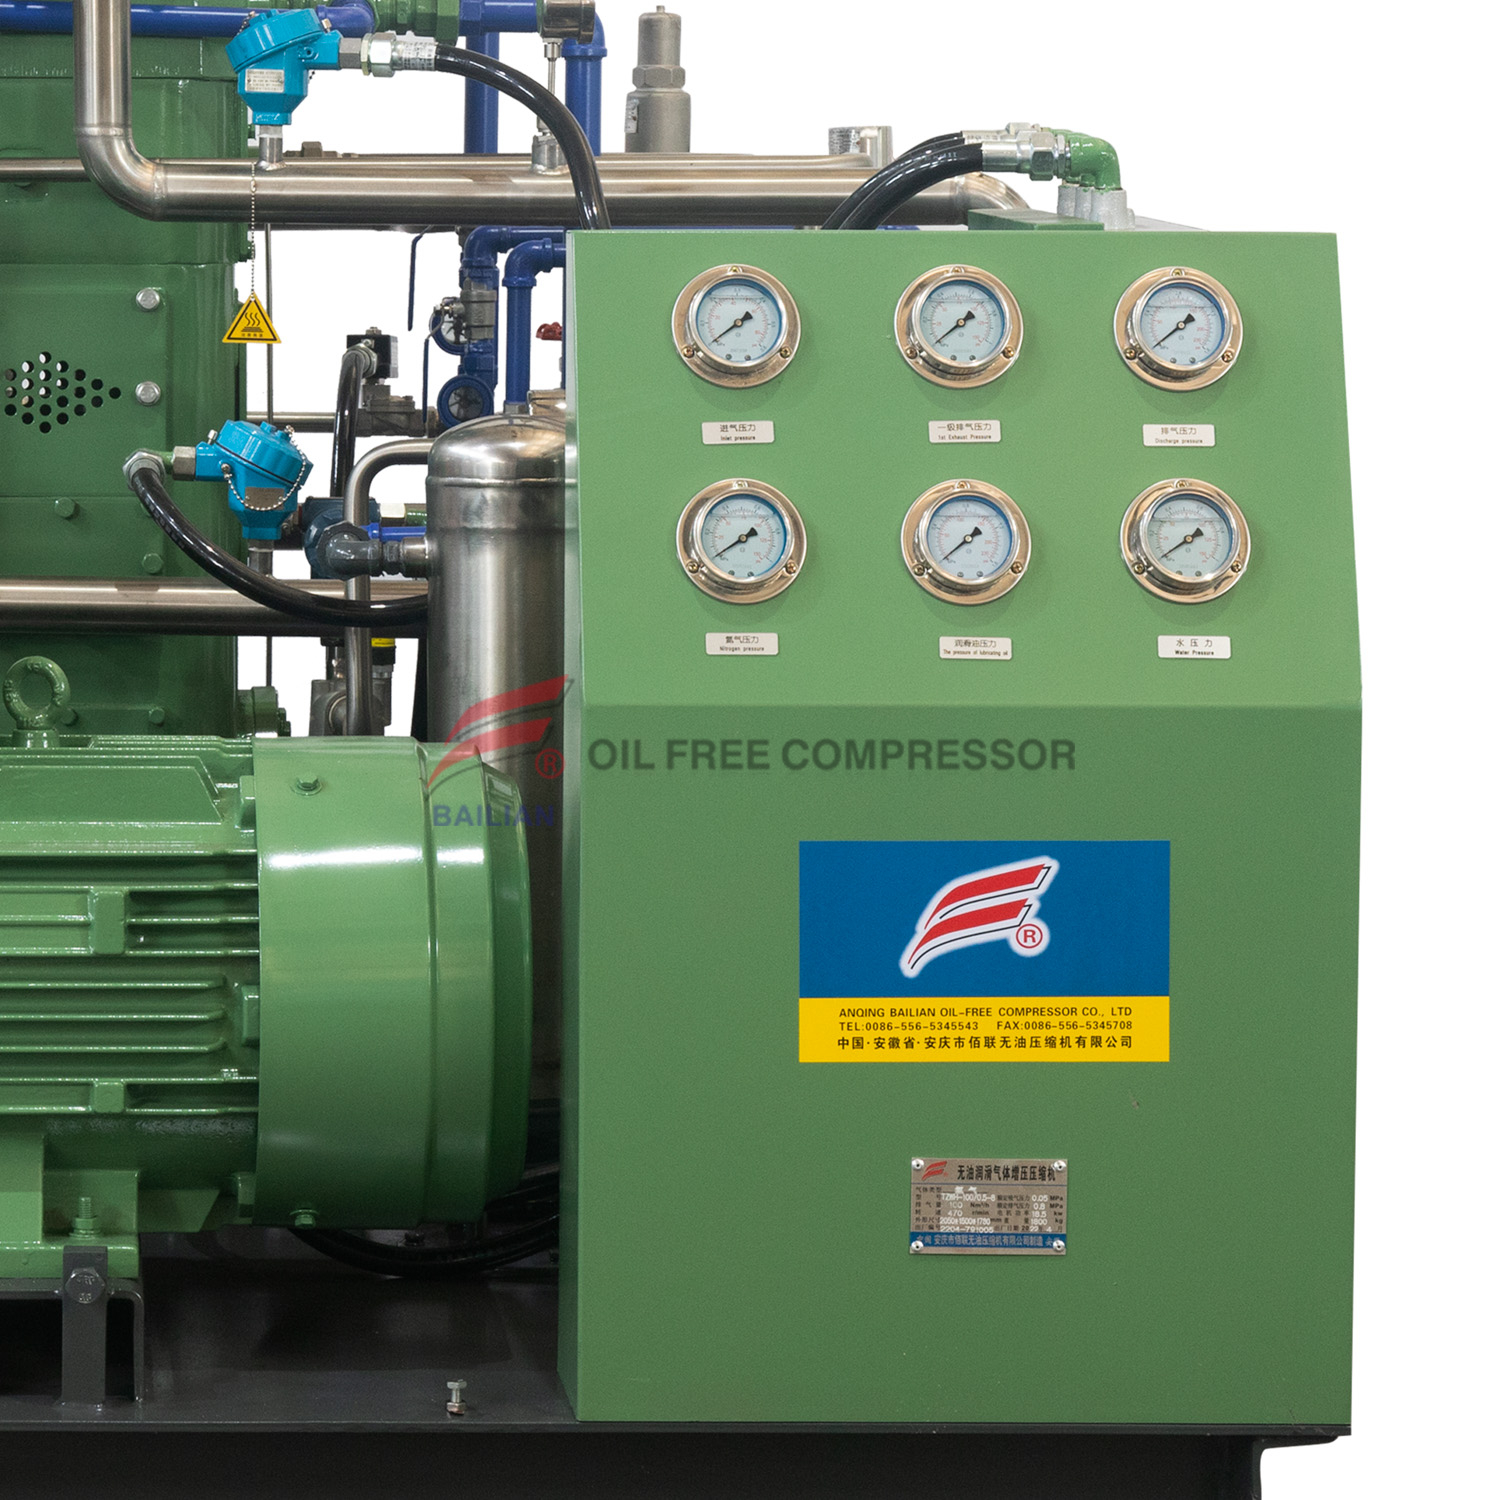 TZWH-100/1-10 Vertical Oil-free Skid Mounted Type H2 Compressor 